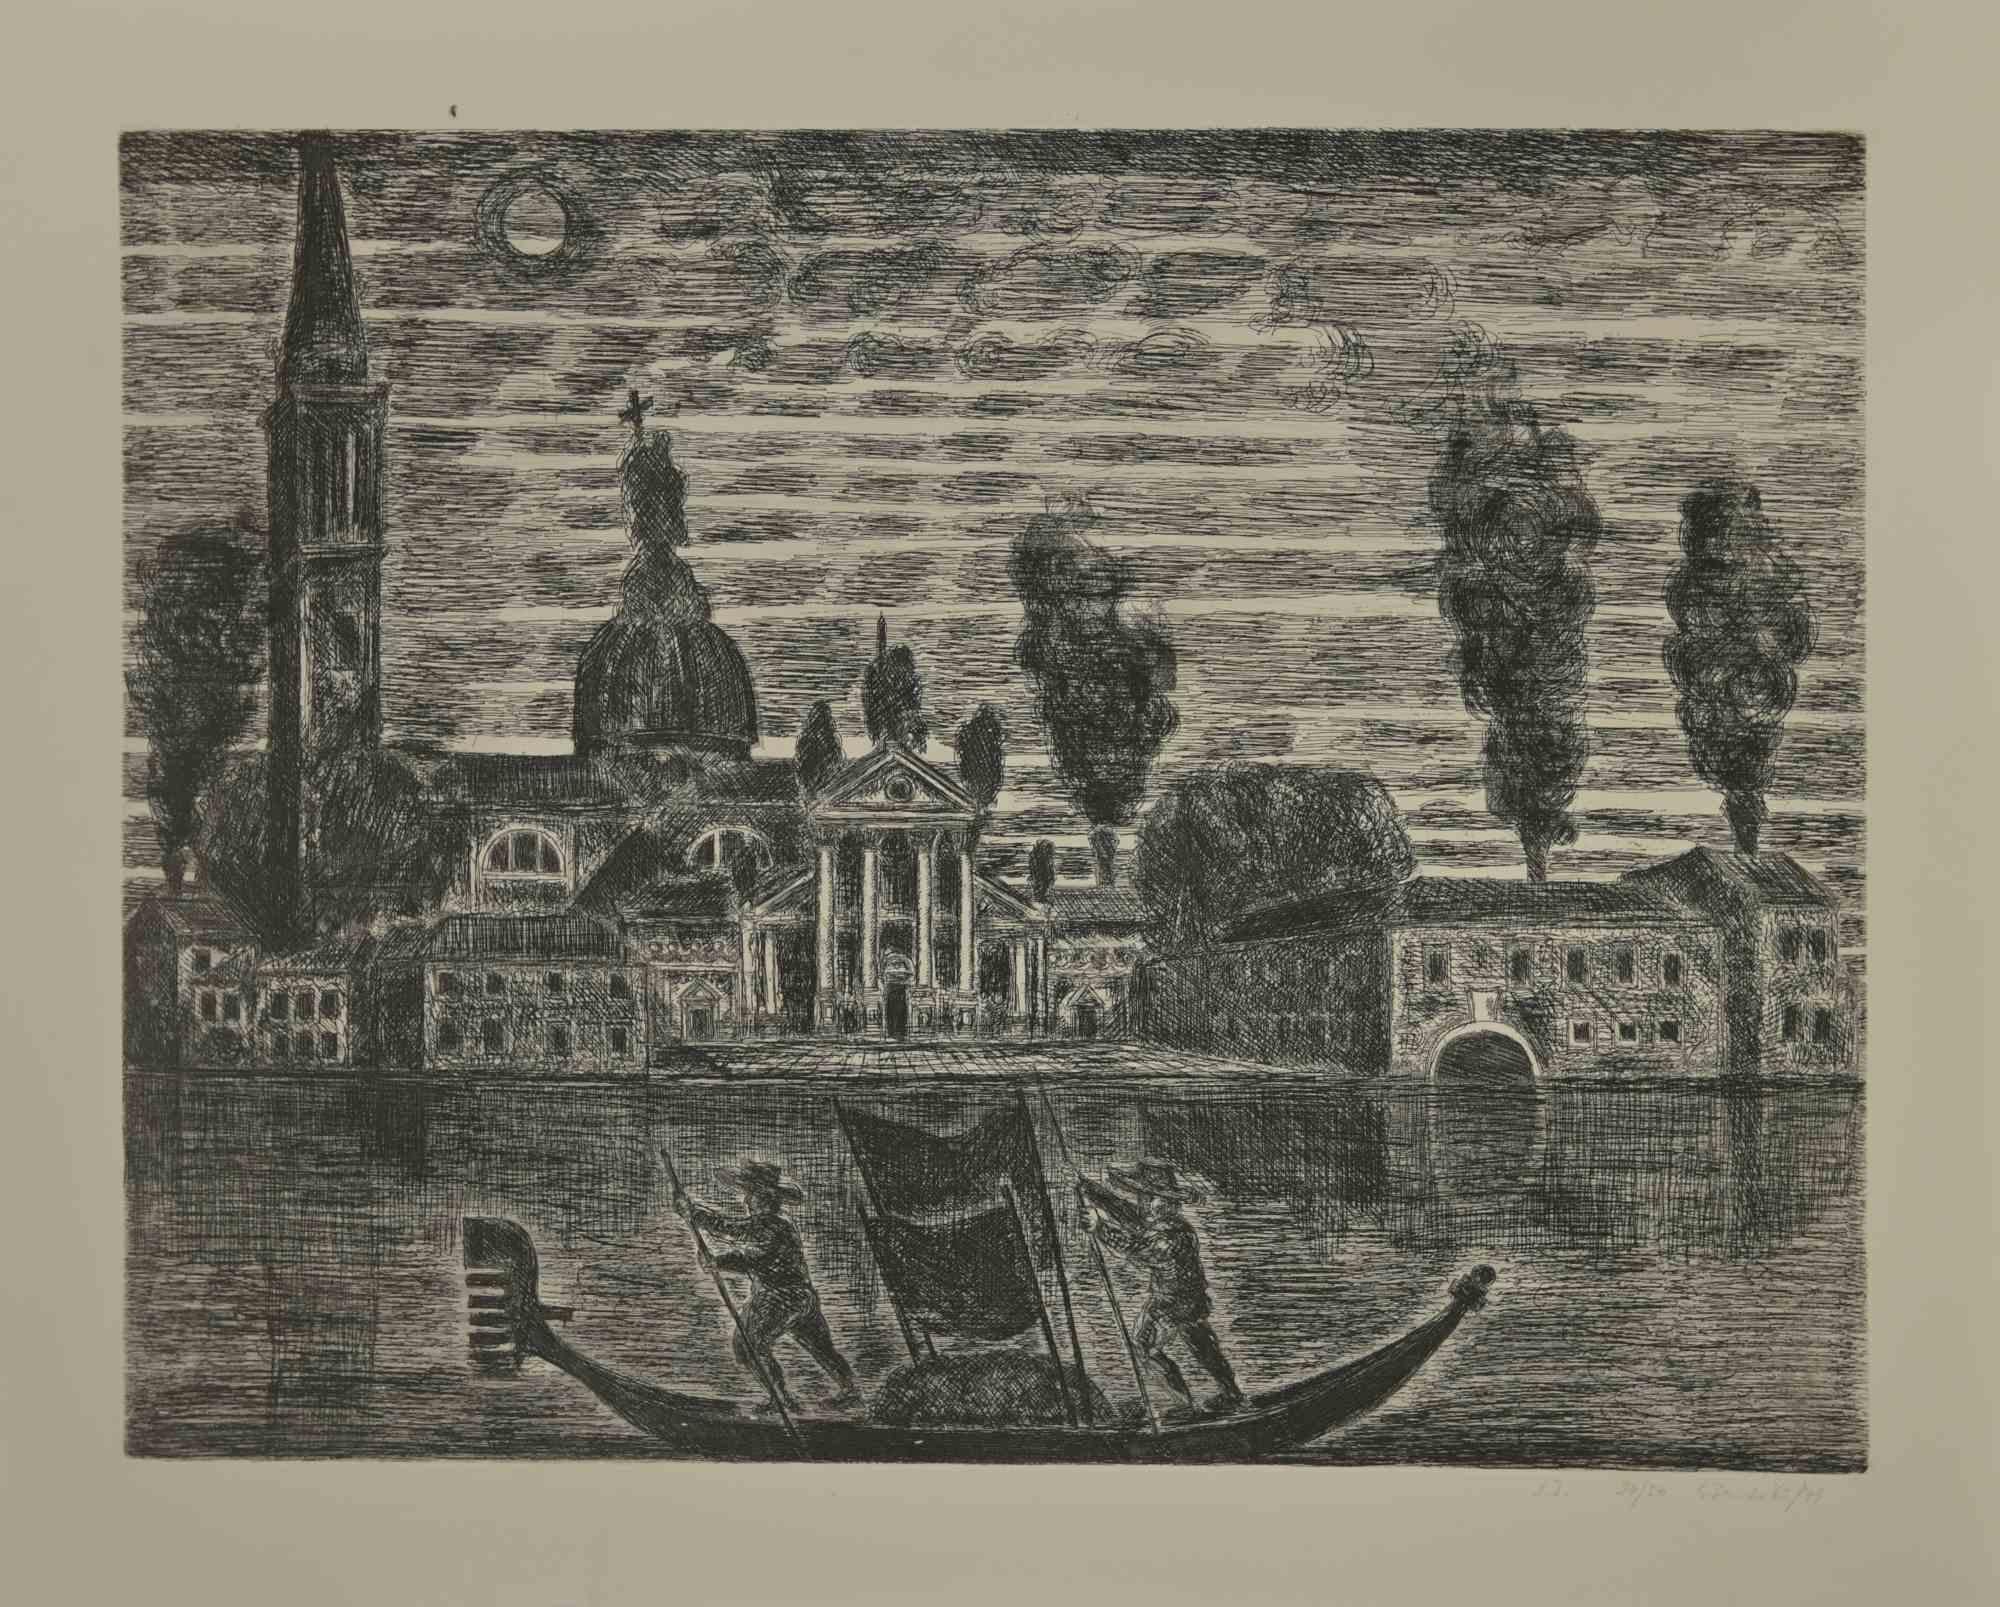 Gondoliers in Venice is an etching realized by Gianpaolo Berto in 1974.

60 X 75 cm , no frame.

Edition 24/50. Numbered and firmed by the artist in the lower margin.

Good conditions.

 

Gianpaolo Berto (1940) was born and raised in the